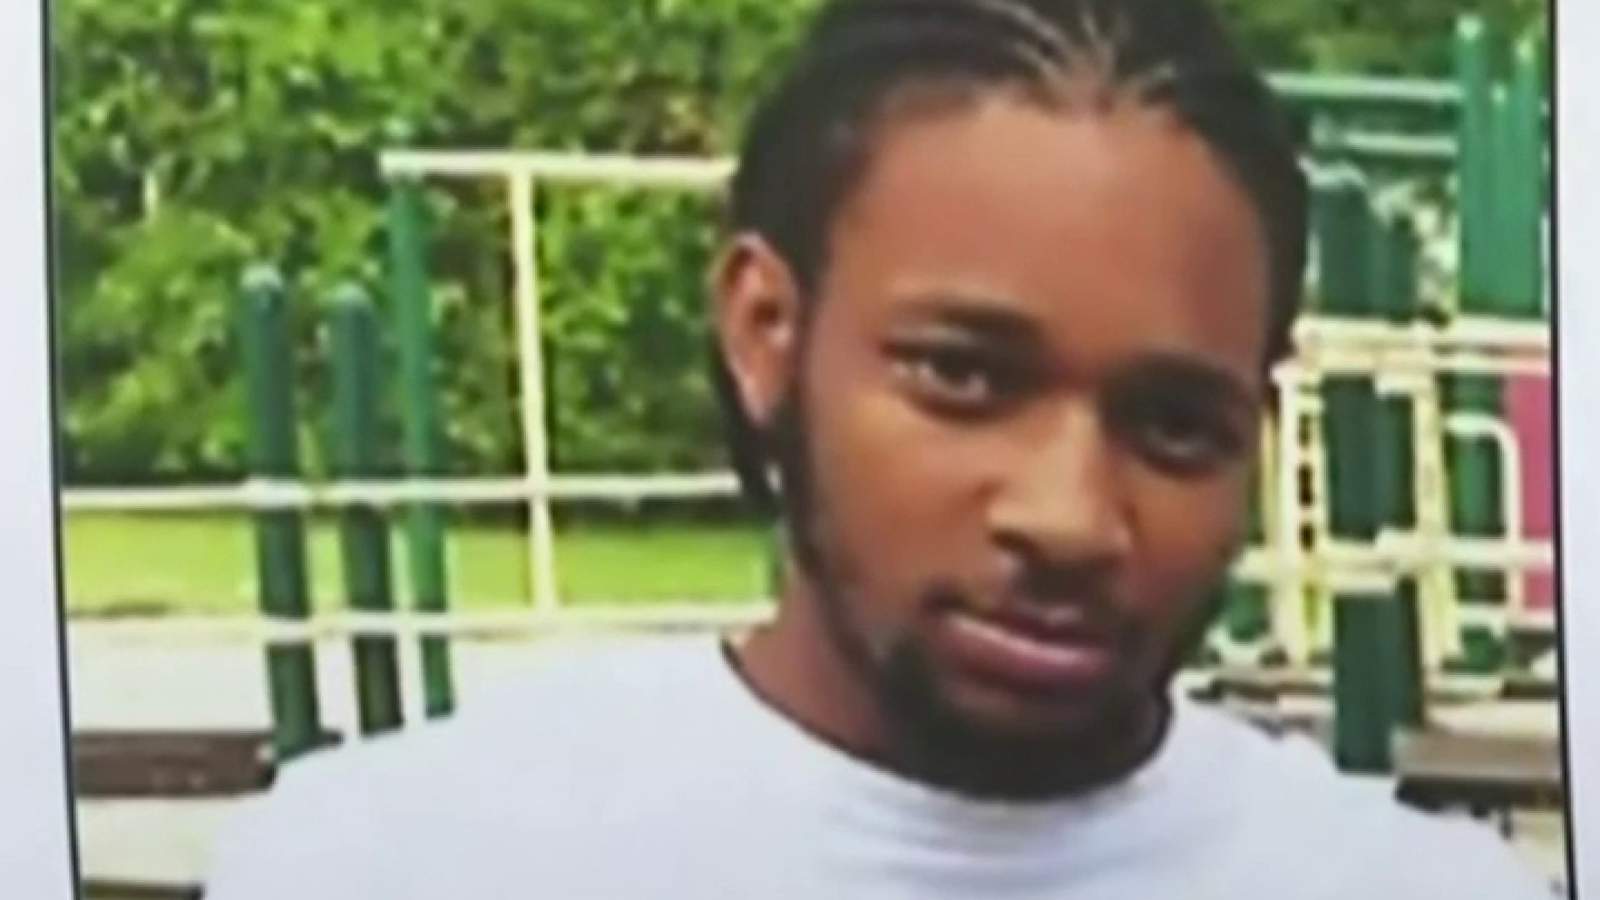 Crime Stoppers offering $3K reward for information on shooting death of 22-year-old man in Detroit